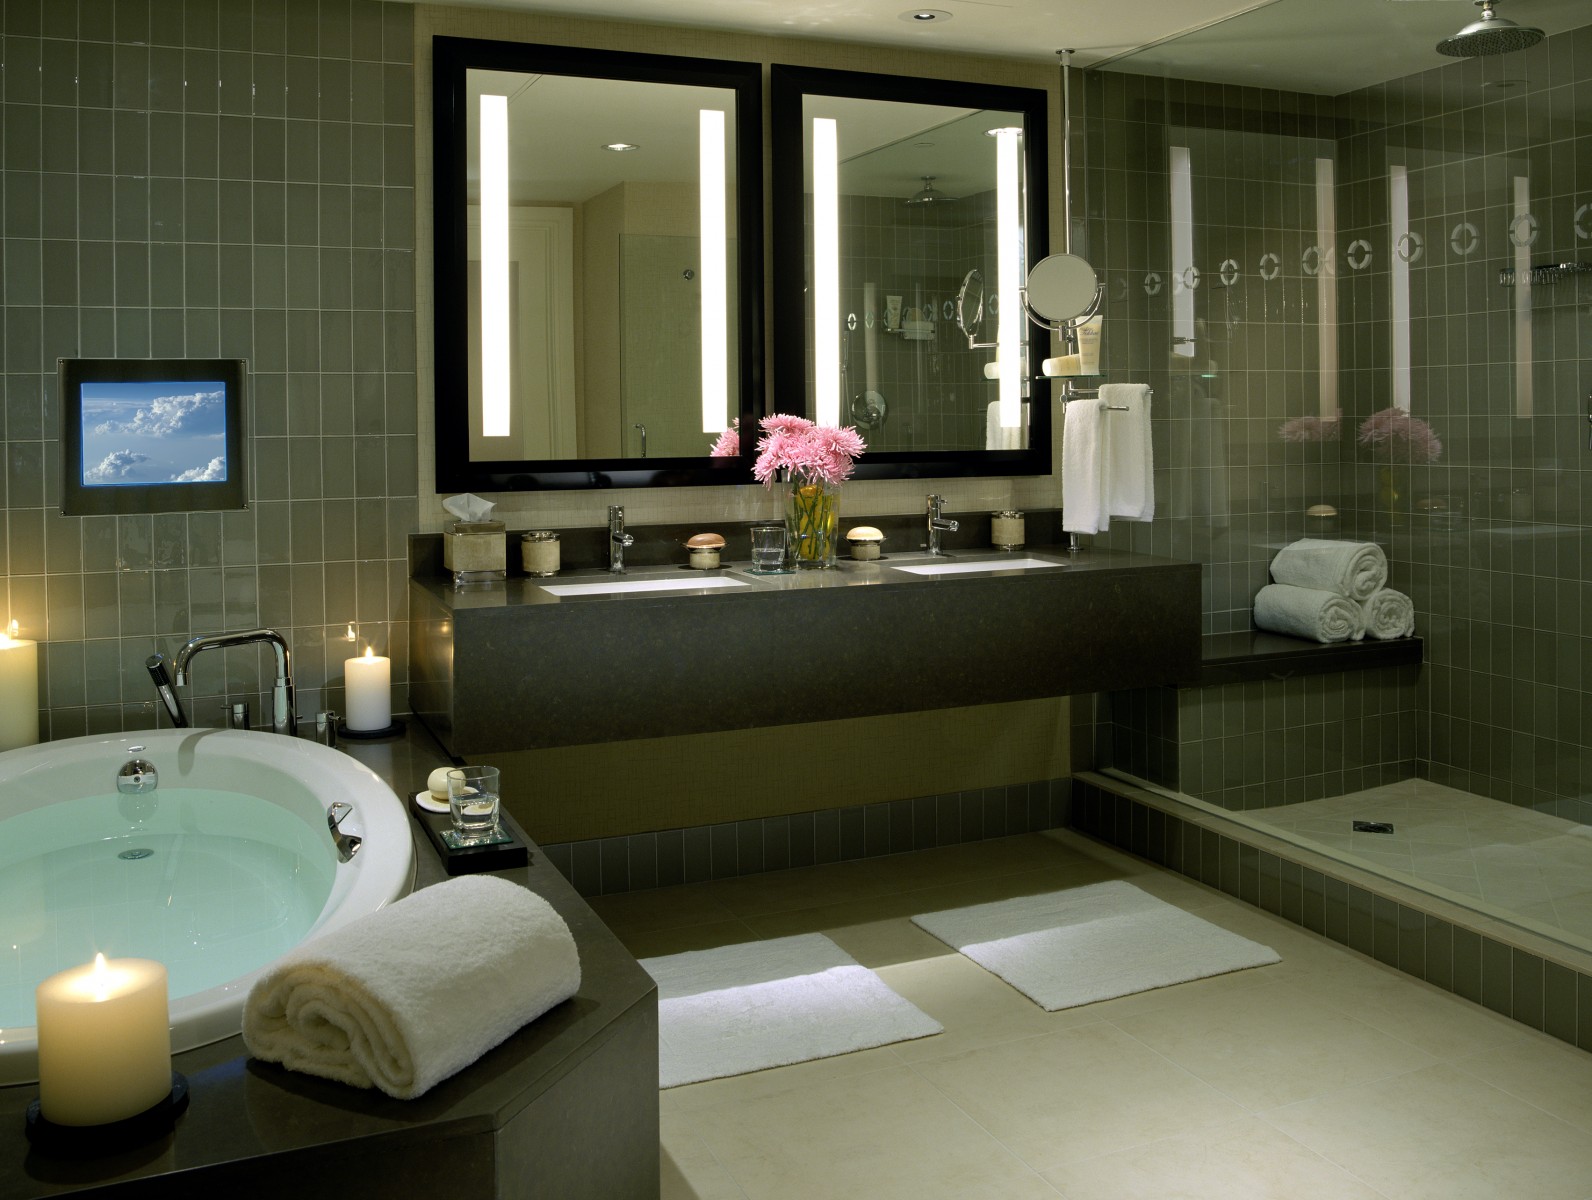 Photo of the hotel Sofitel Los Angeles at Beverly Hills: Presidential suite bathroom